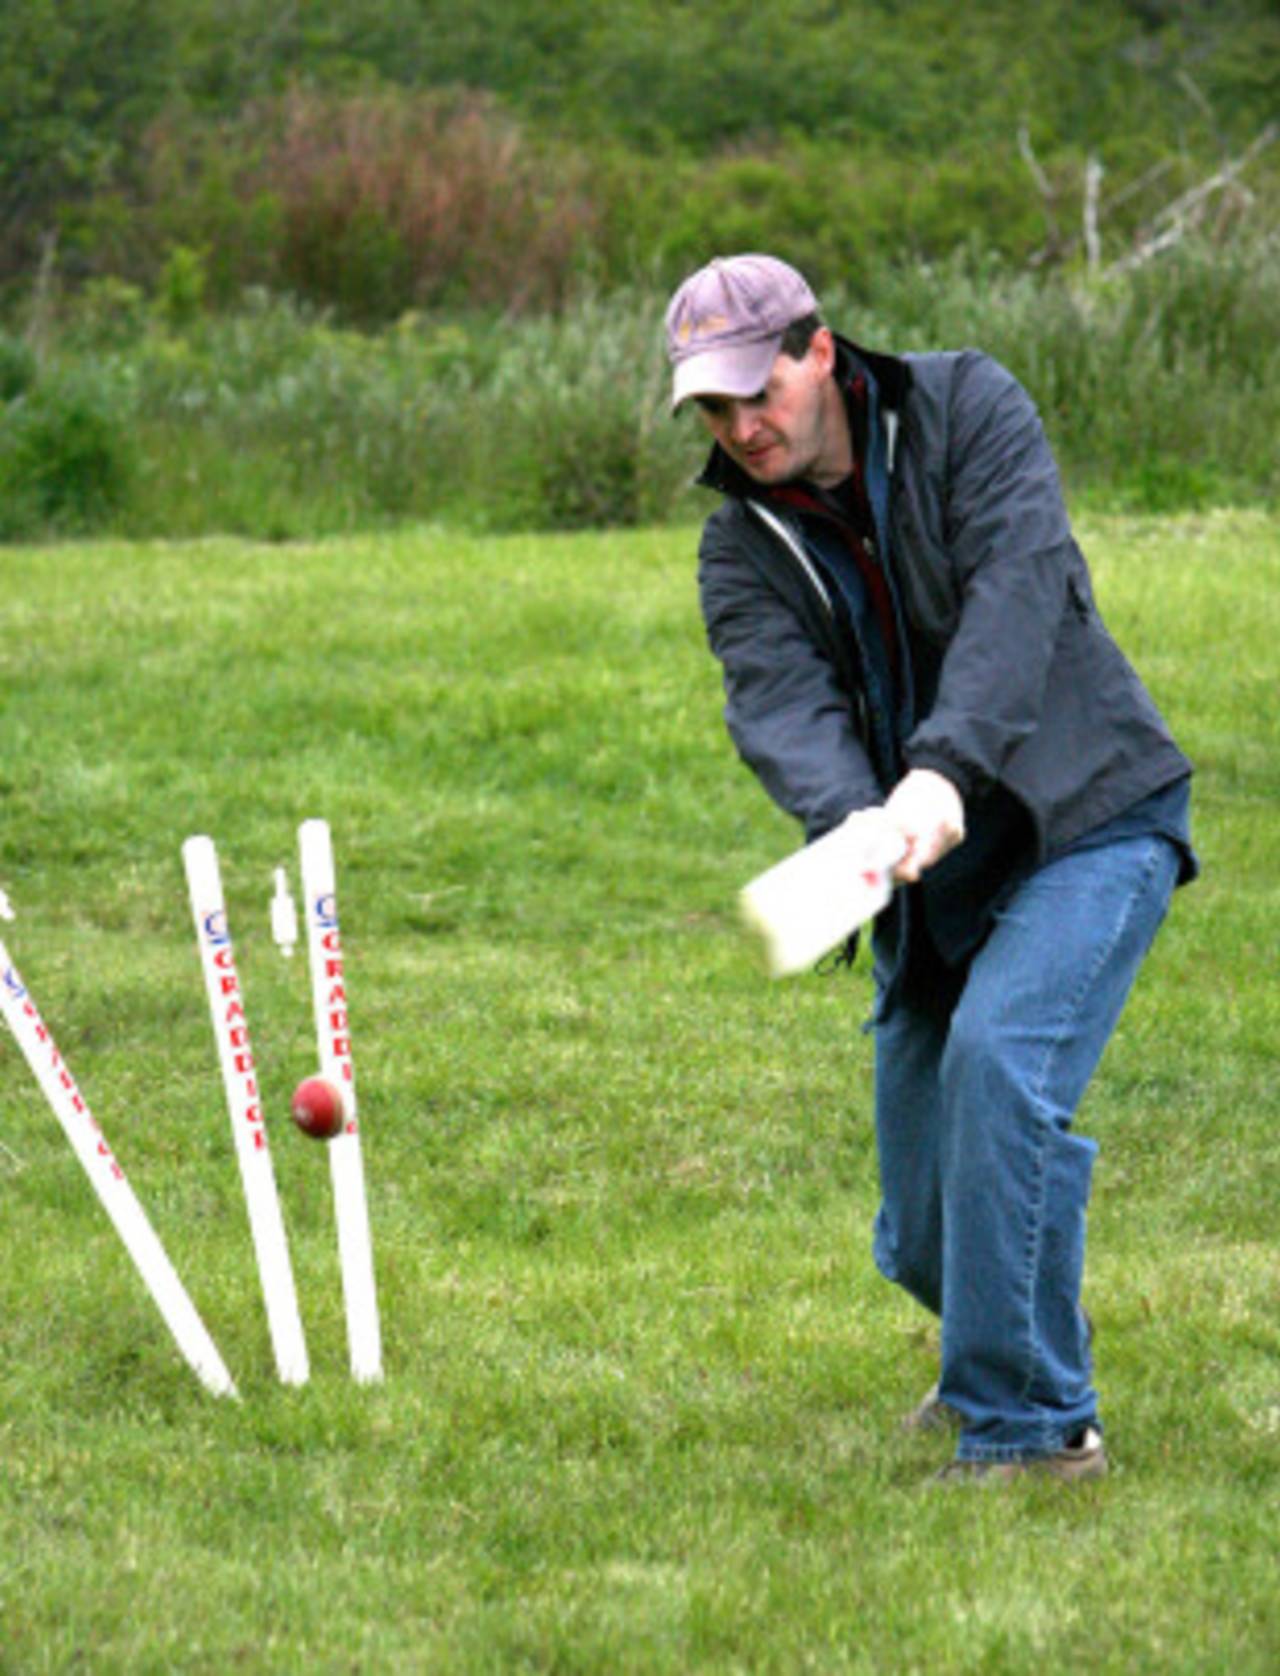 A match in progress on a camping ground, Newfoundland